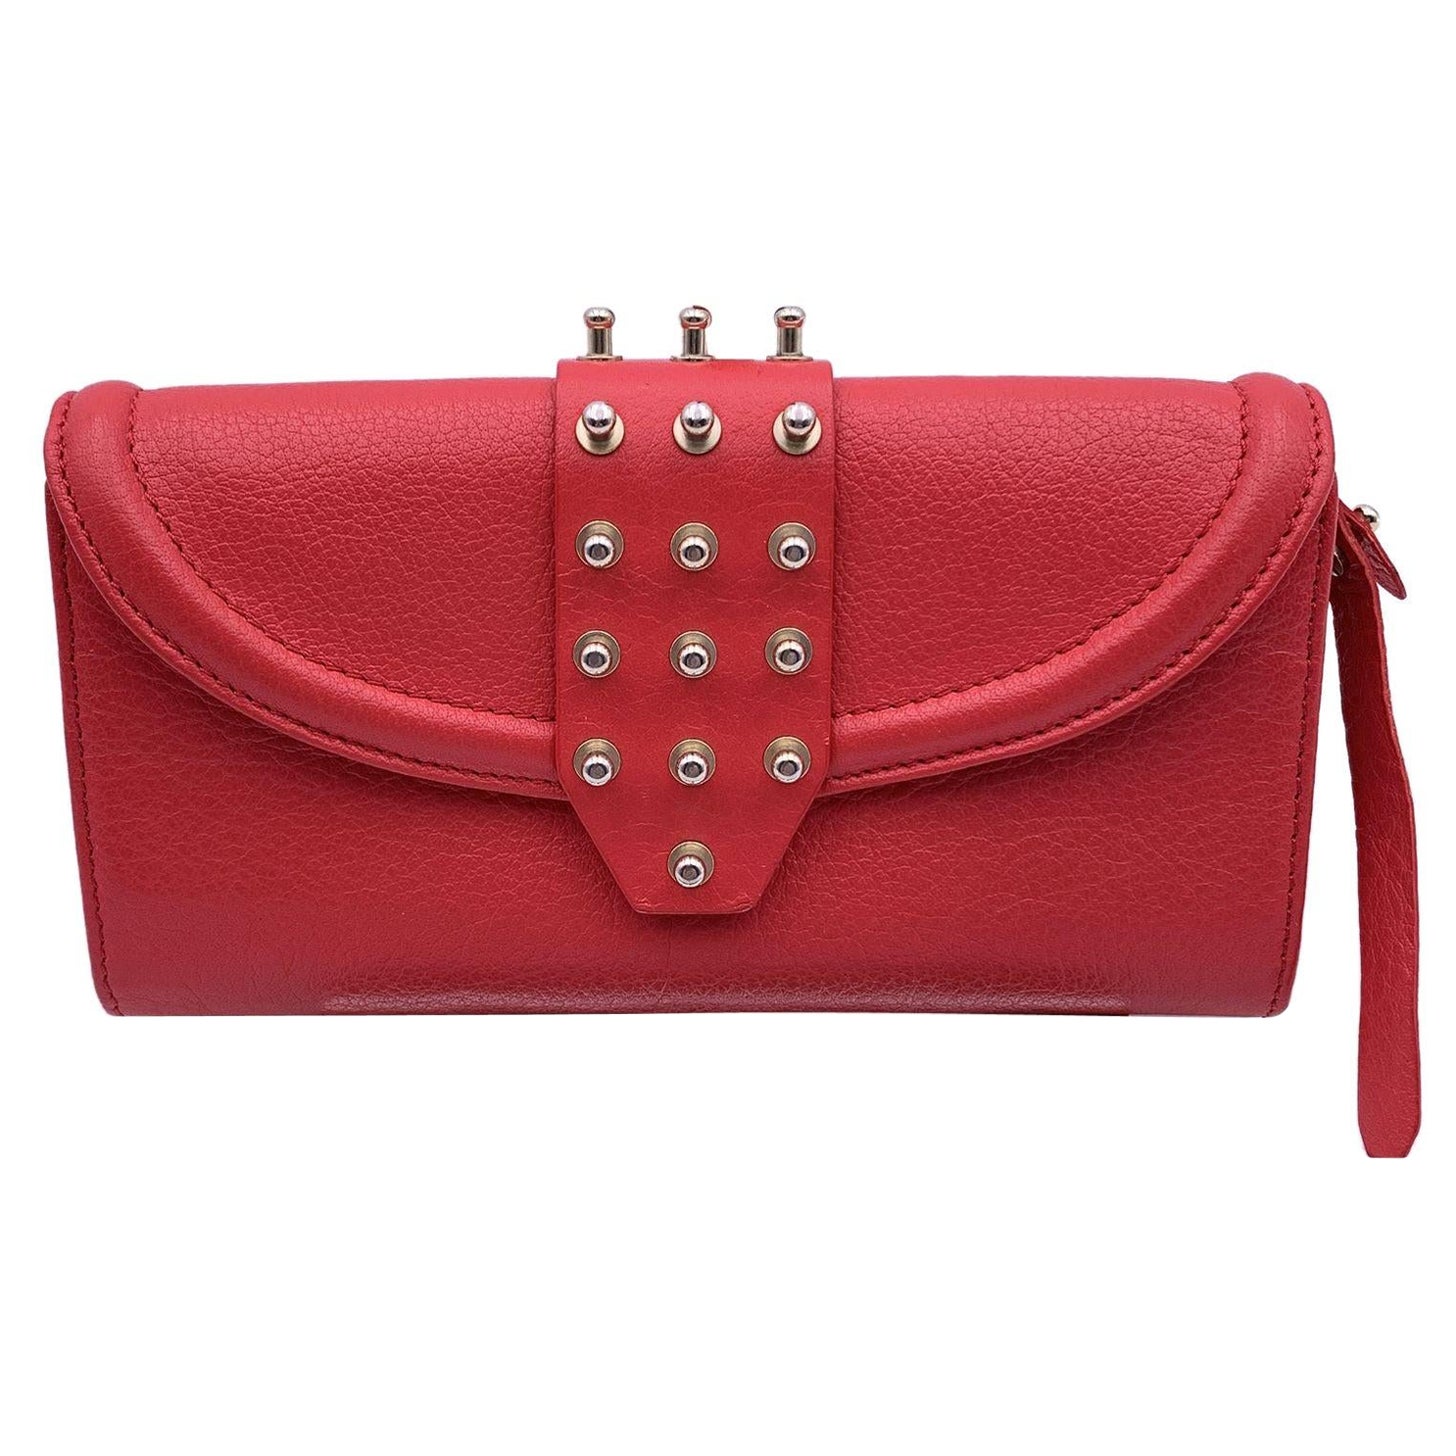 McQ Alexander McQueen Red Leather Studded Continental Wallet For Sale